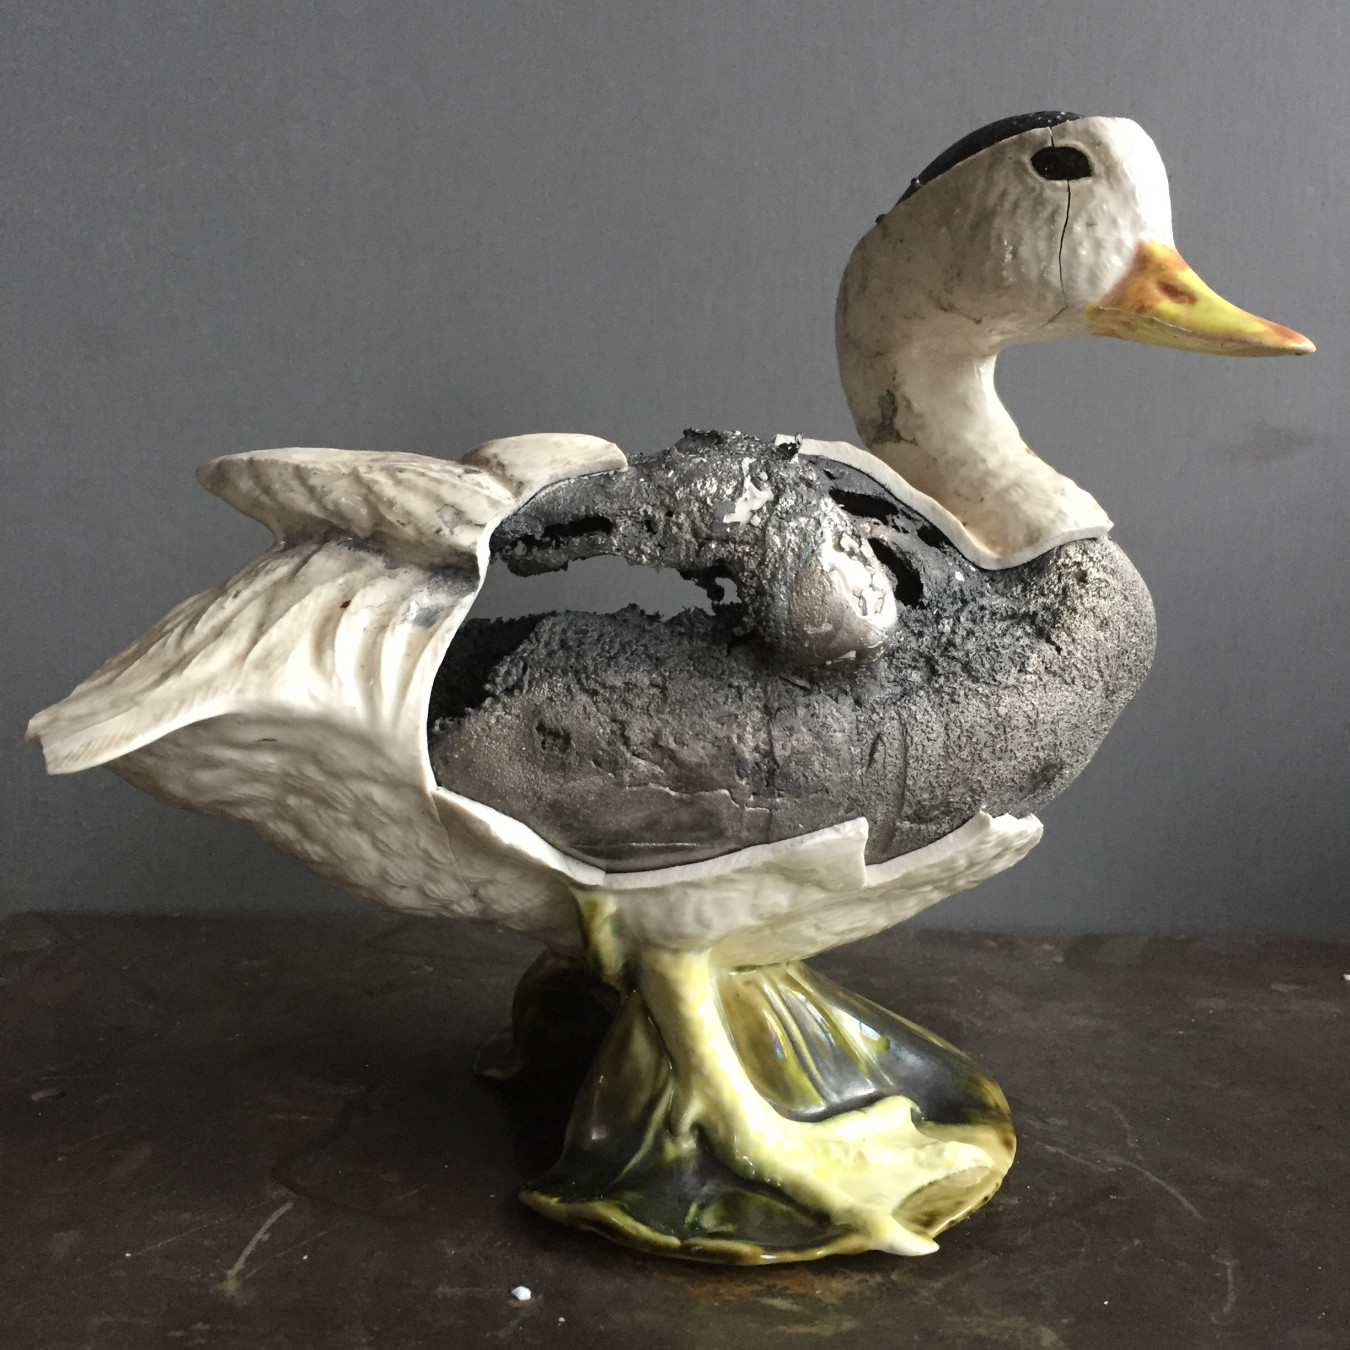 Image of a ceramic duck that is cracked and broken because molten pewter was poured into it as it is slipcast